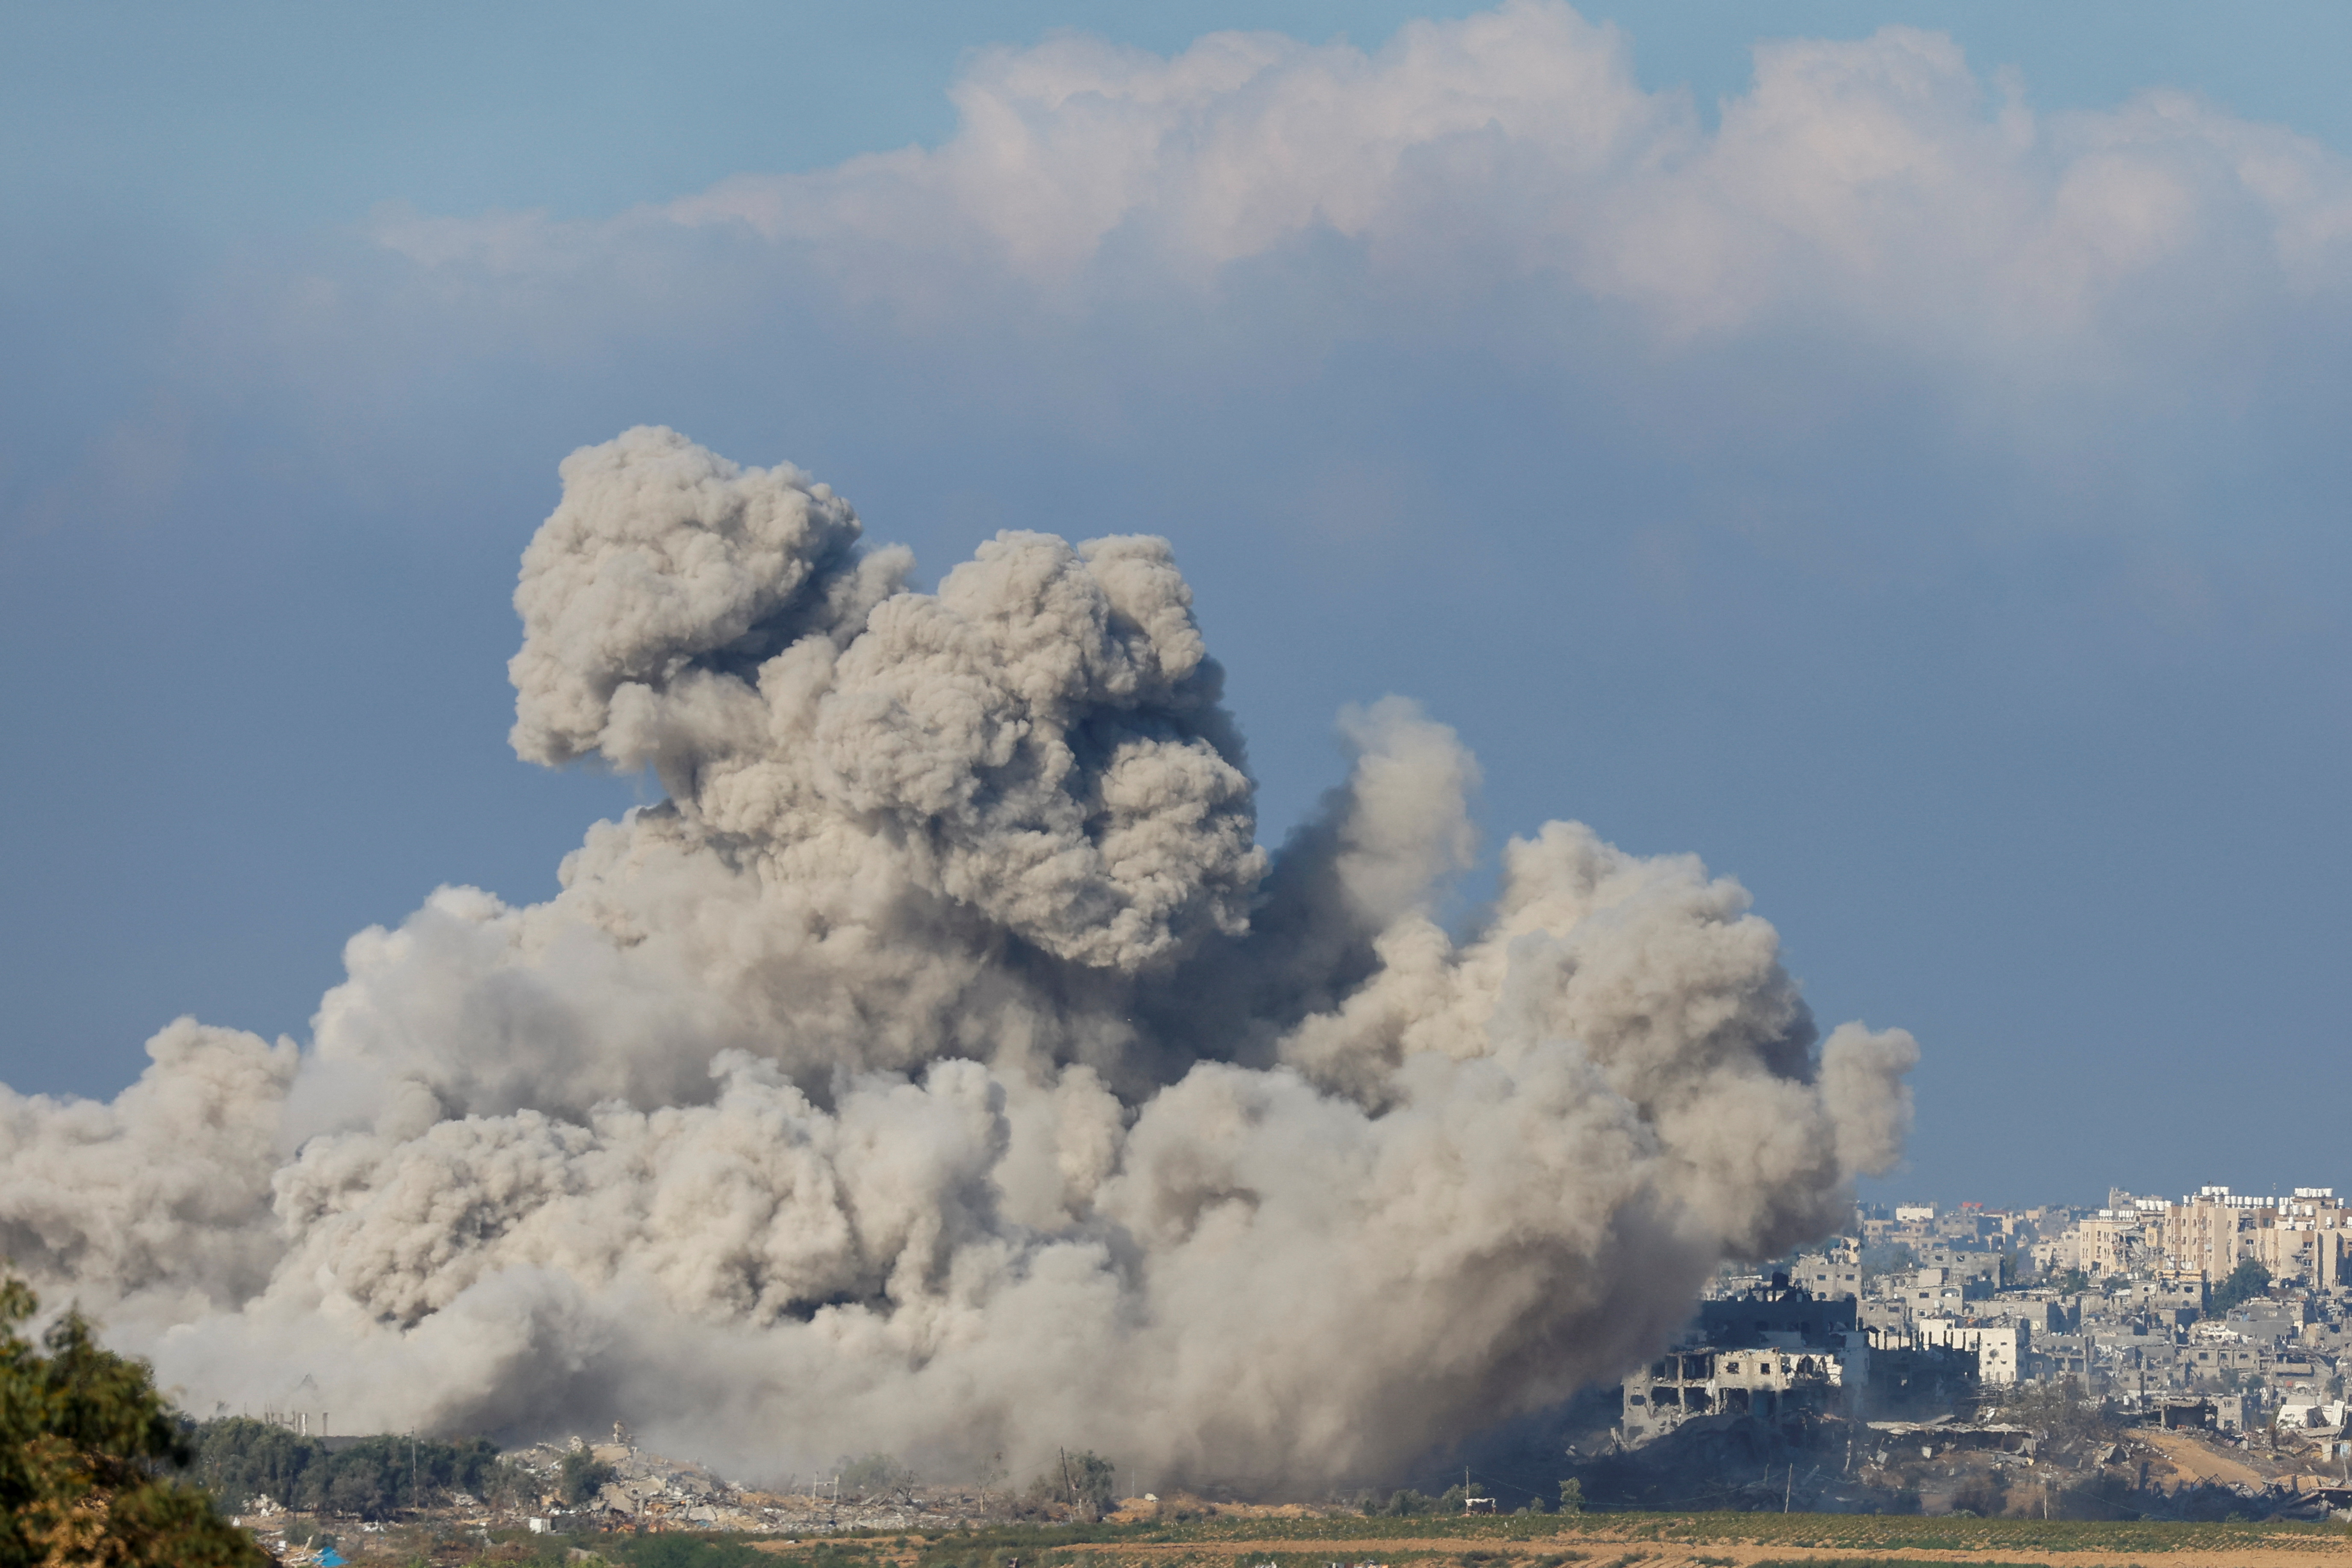 Smoke rises following an airstrike in Gaza, as seen from southern Israel, amid the ongoing conflict between Israel and the Palestinian group Hamas